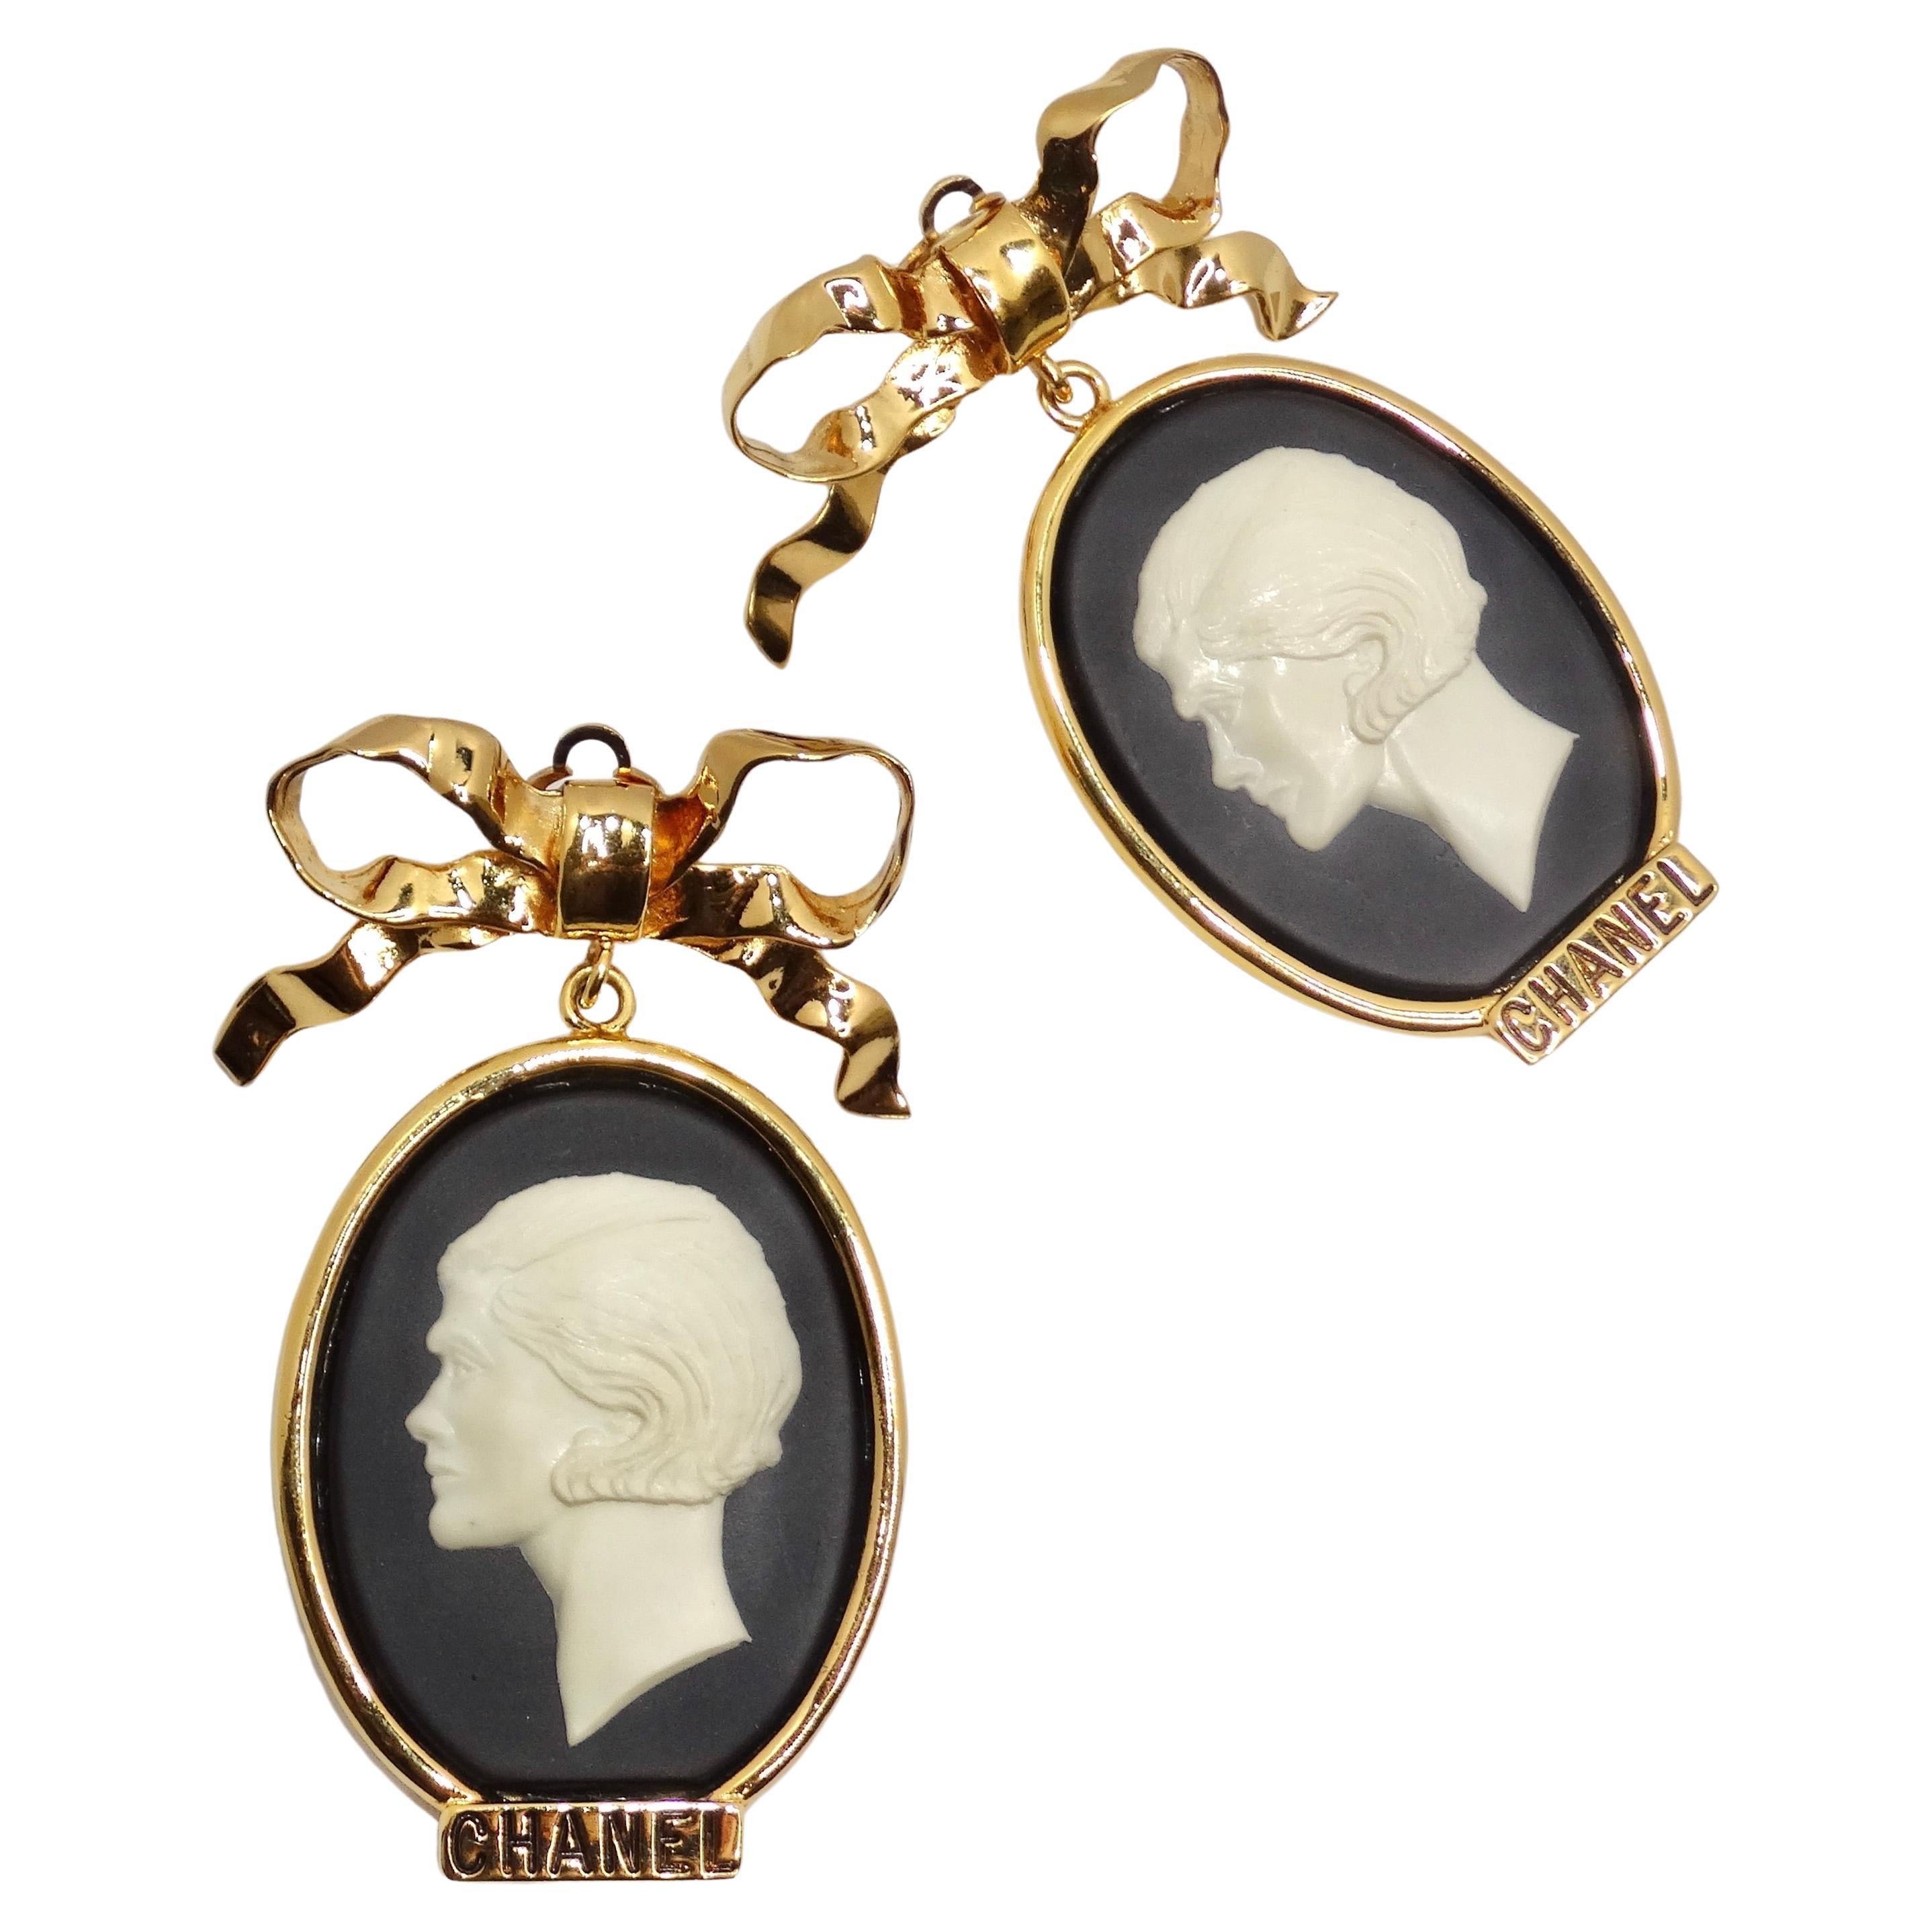 Chanel Rare 1980s Large Gold Tone Cameo Earrings In Excellent Condition For Sale In Scottsdale, AZ